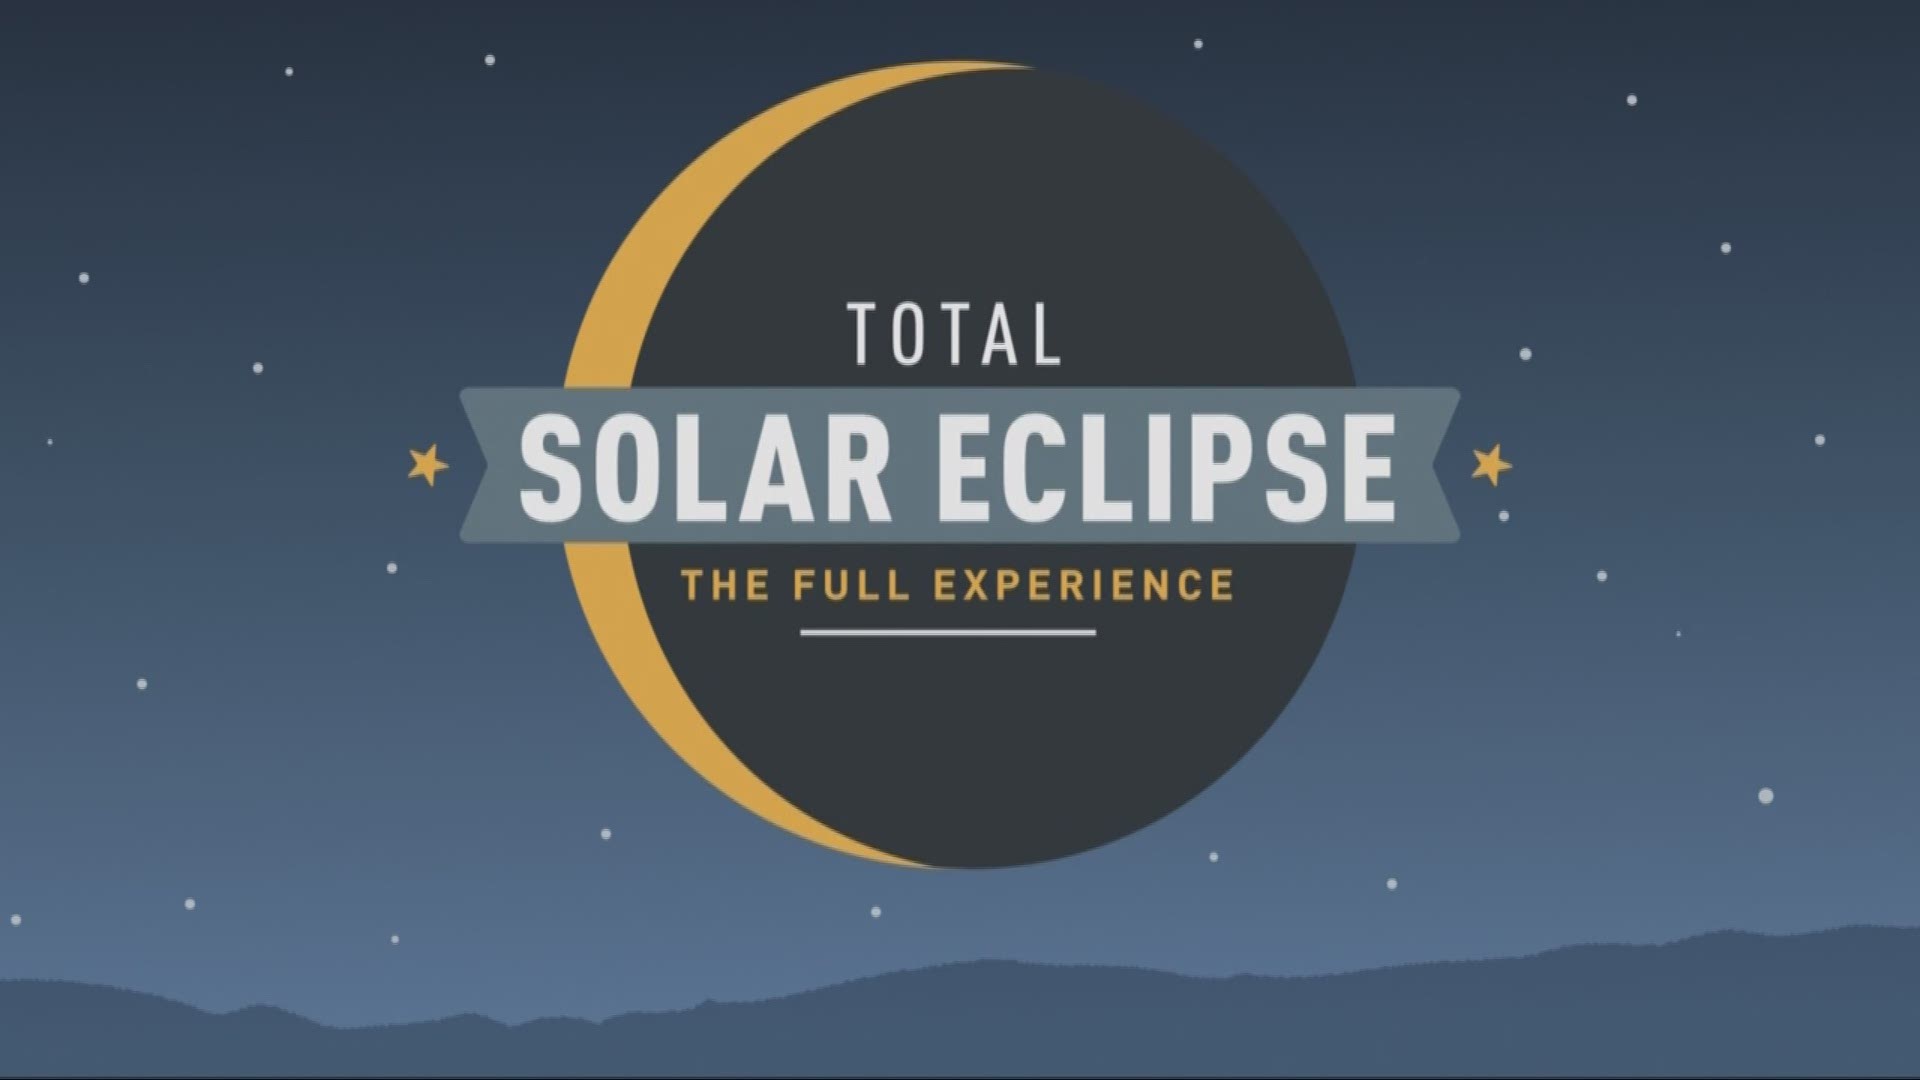 Verifying eclipse glasses questions